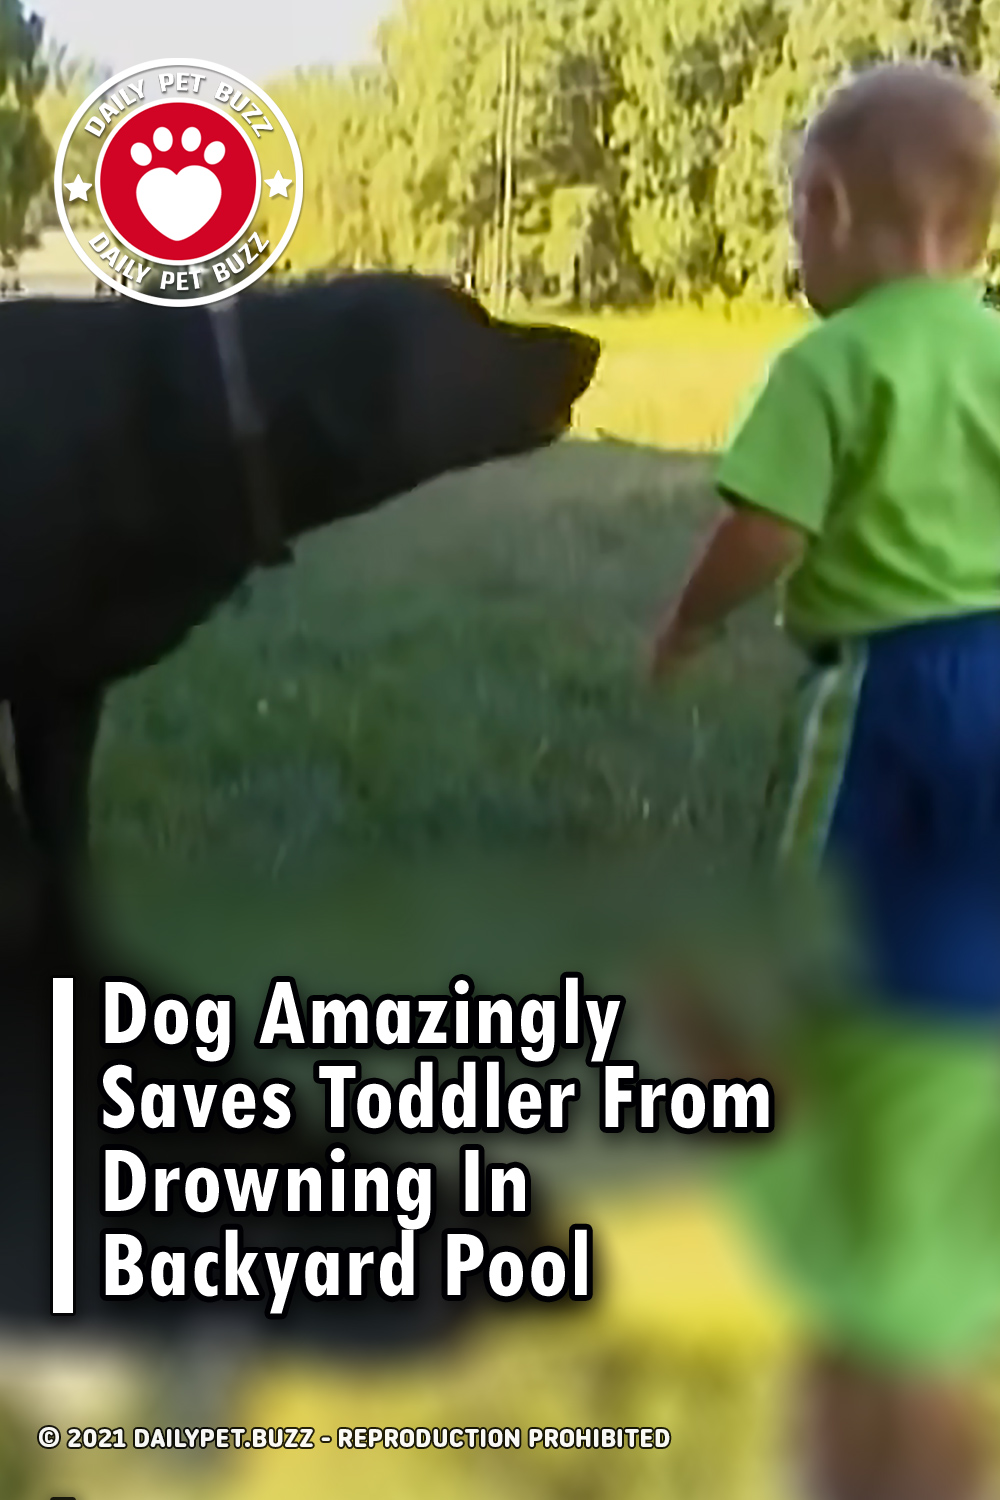 Dog Amazingly Saves Toddler From Drowning In Backyard Pool